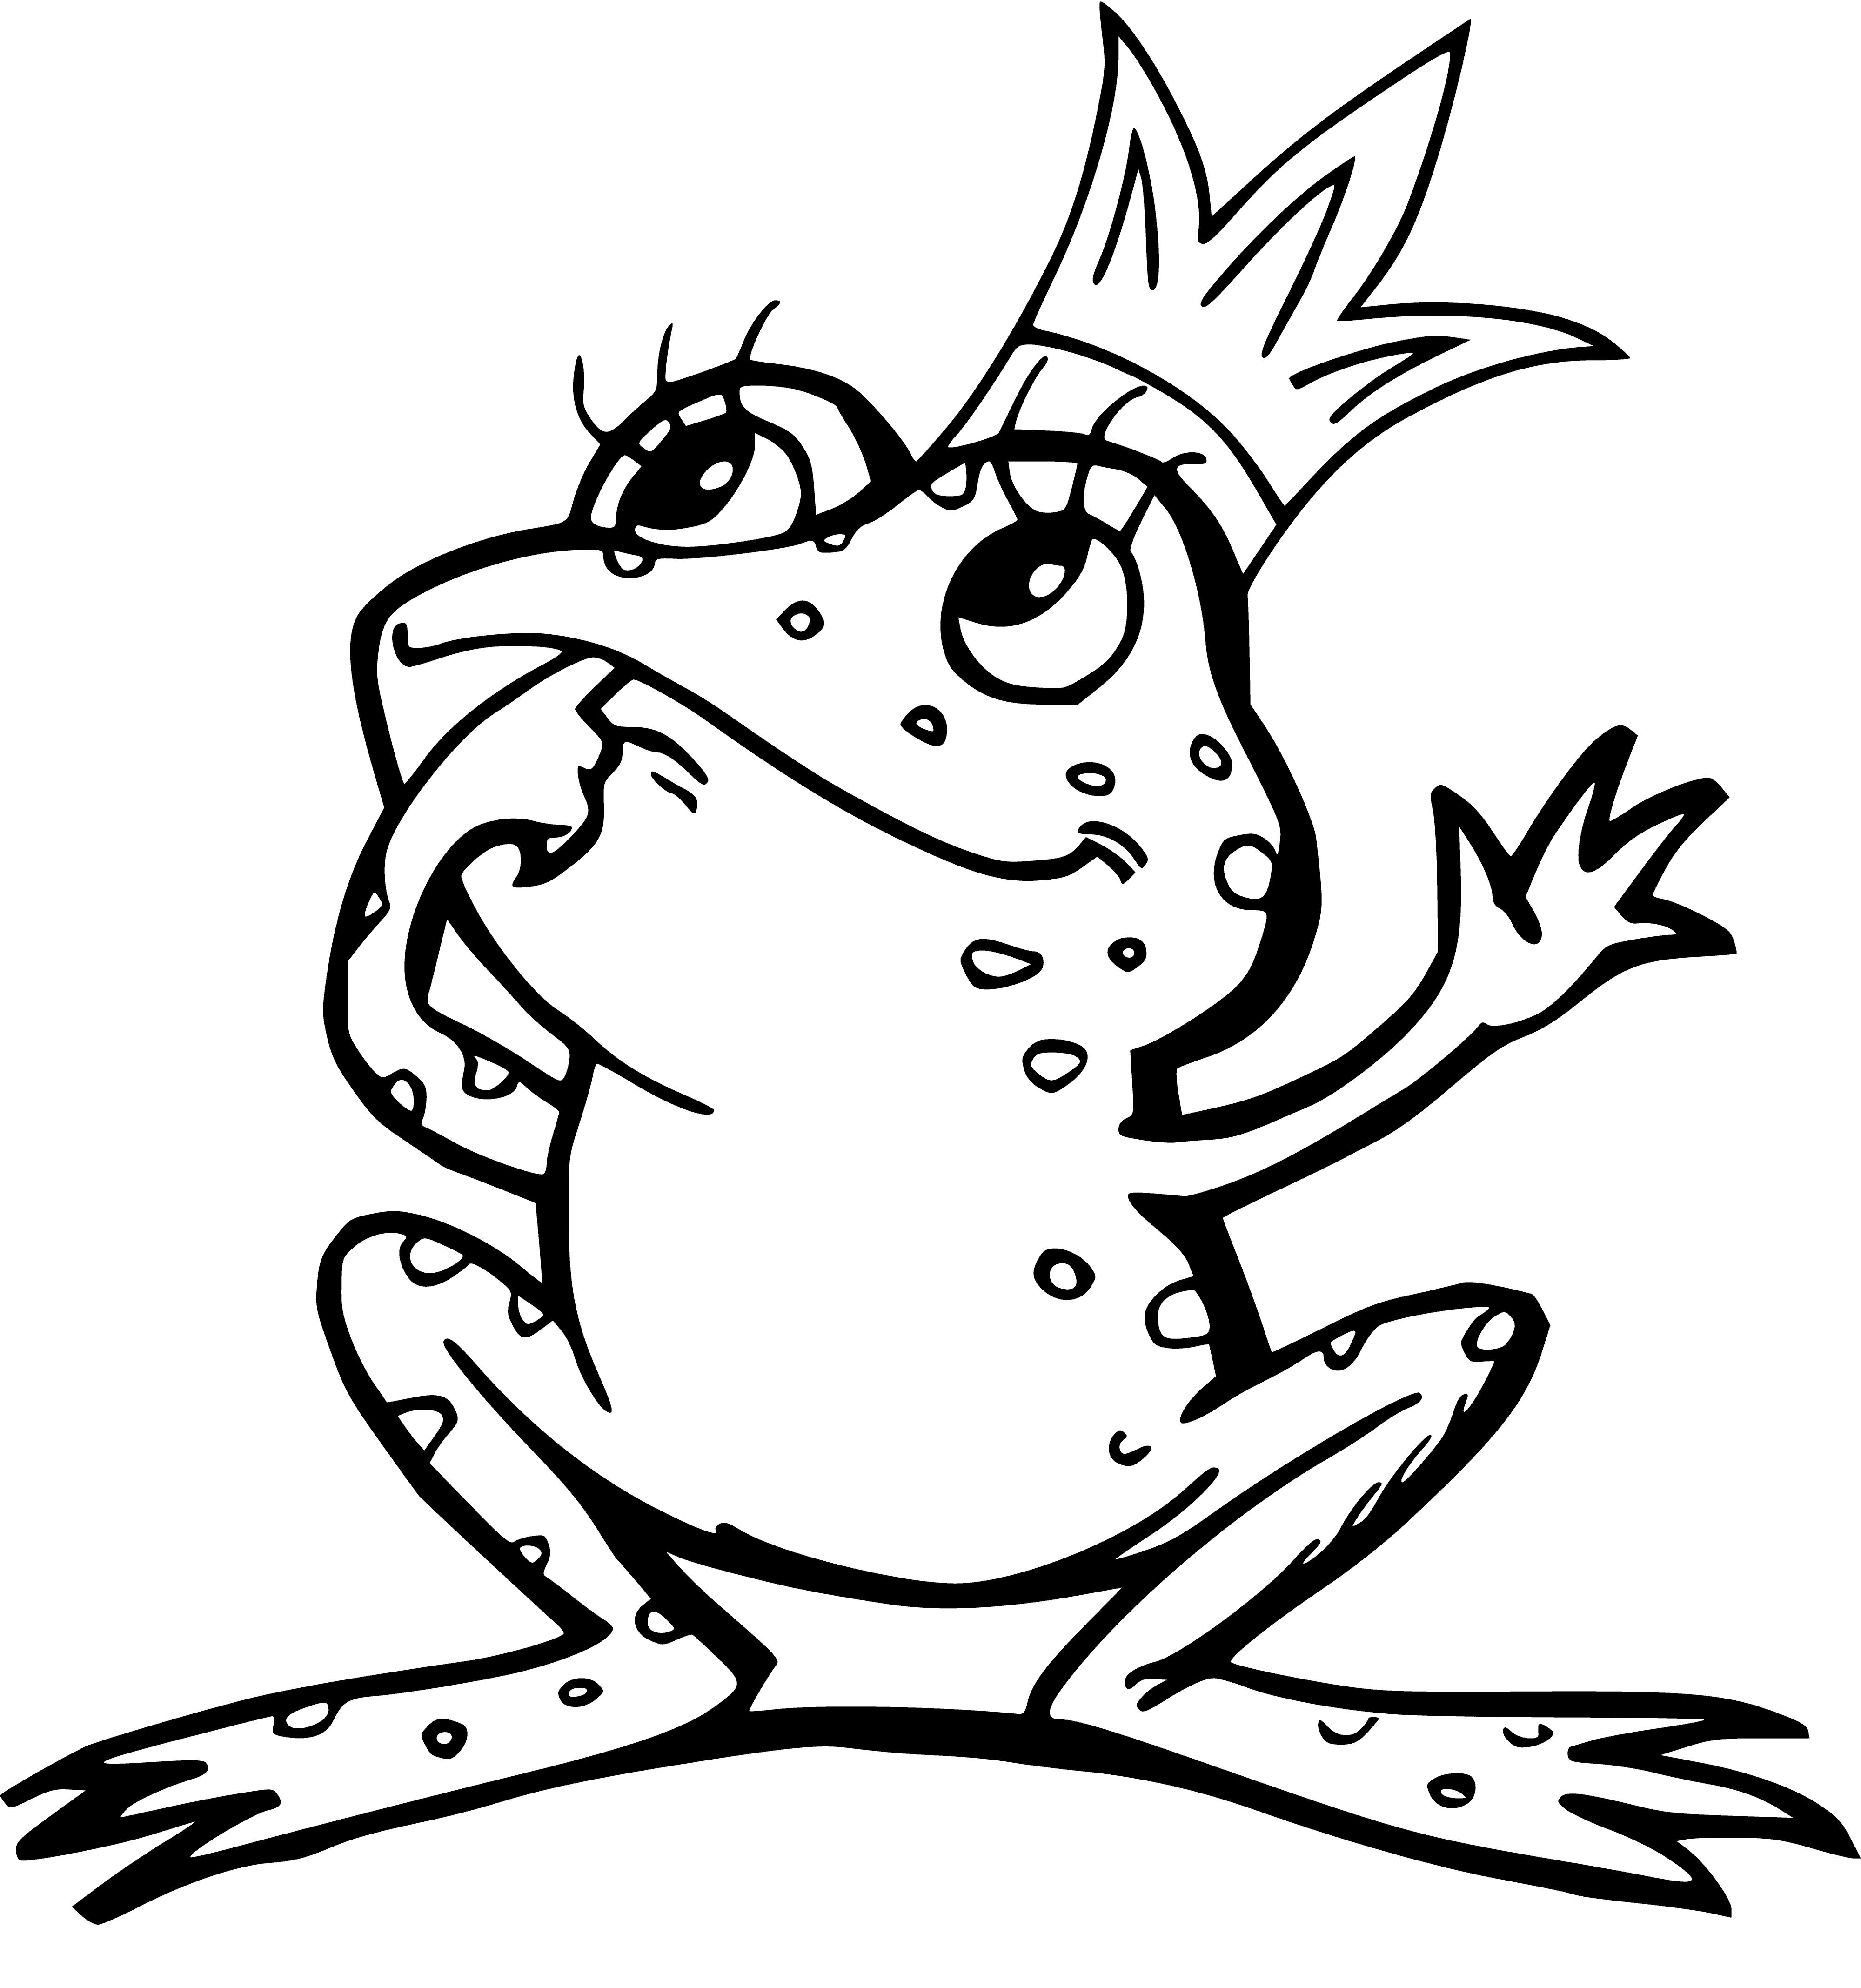 coloring page: Beautiful fair maiden stands beside hopeful frog, dressed in green and wearing a golden crown.